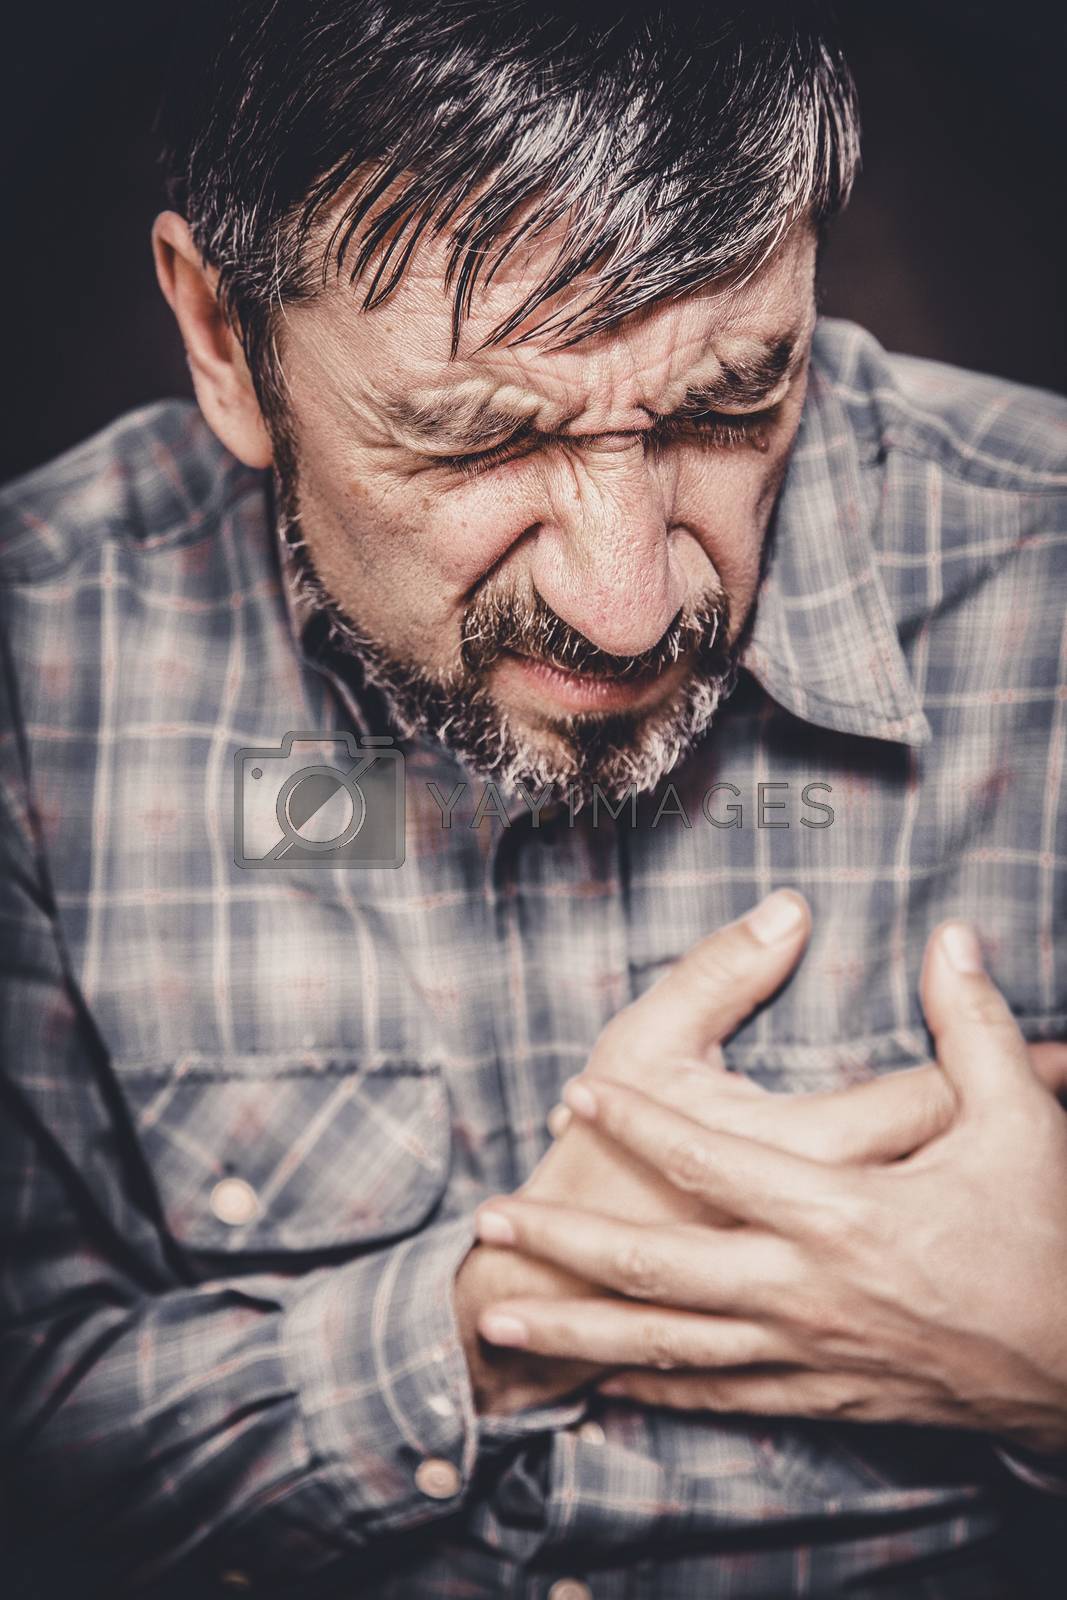 Royalty free image of Man having chest pain by anelina